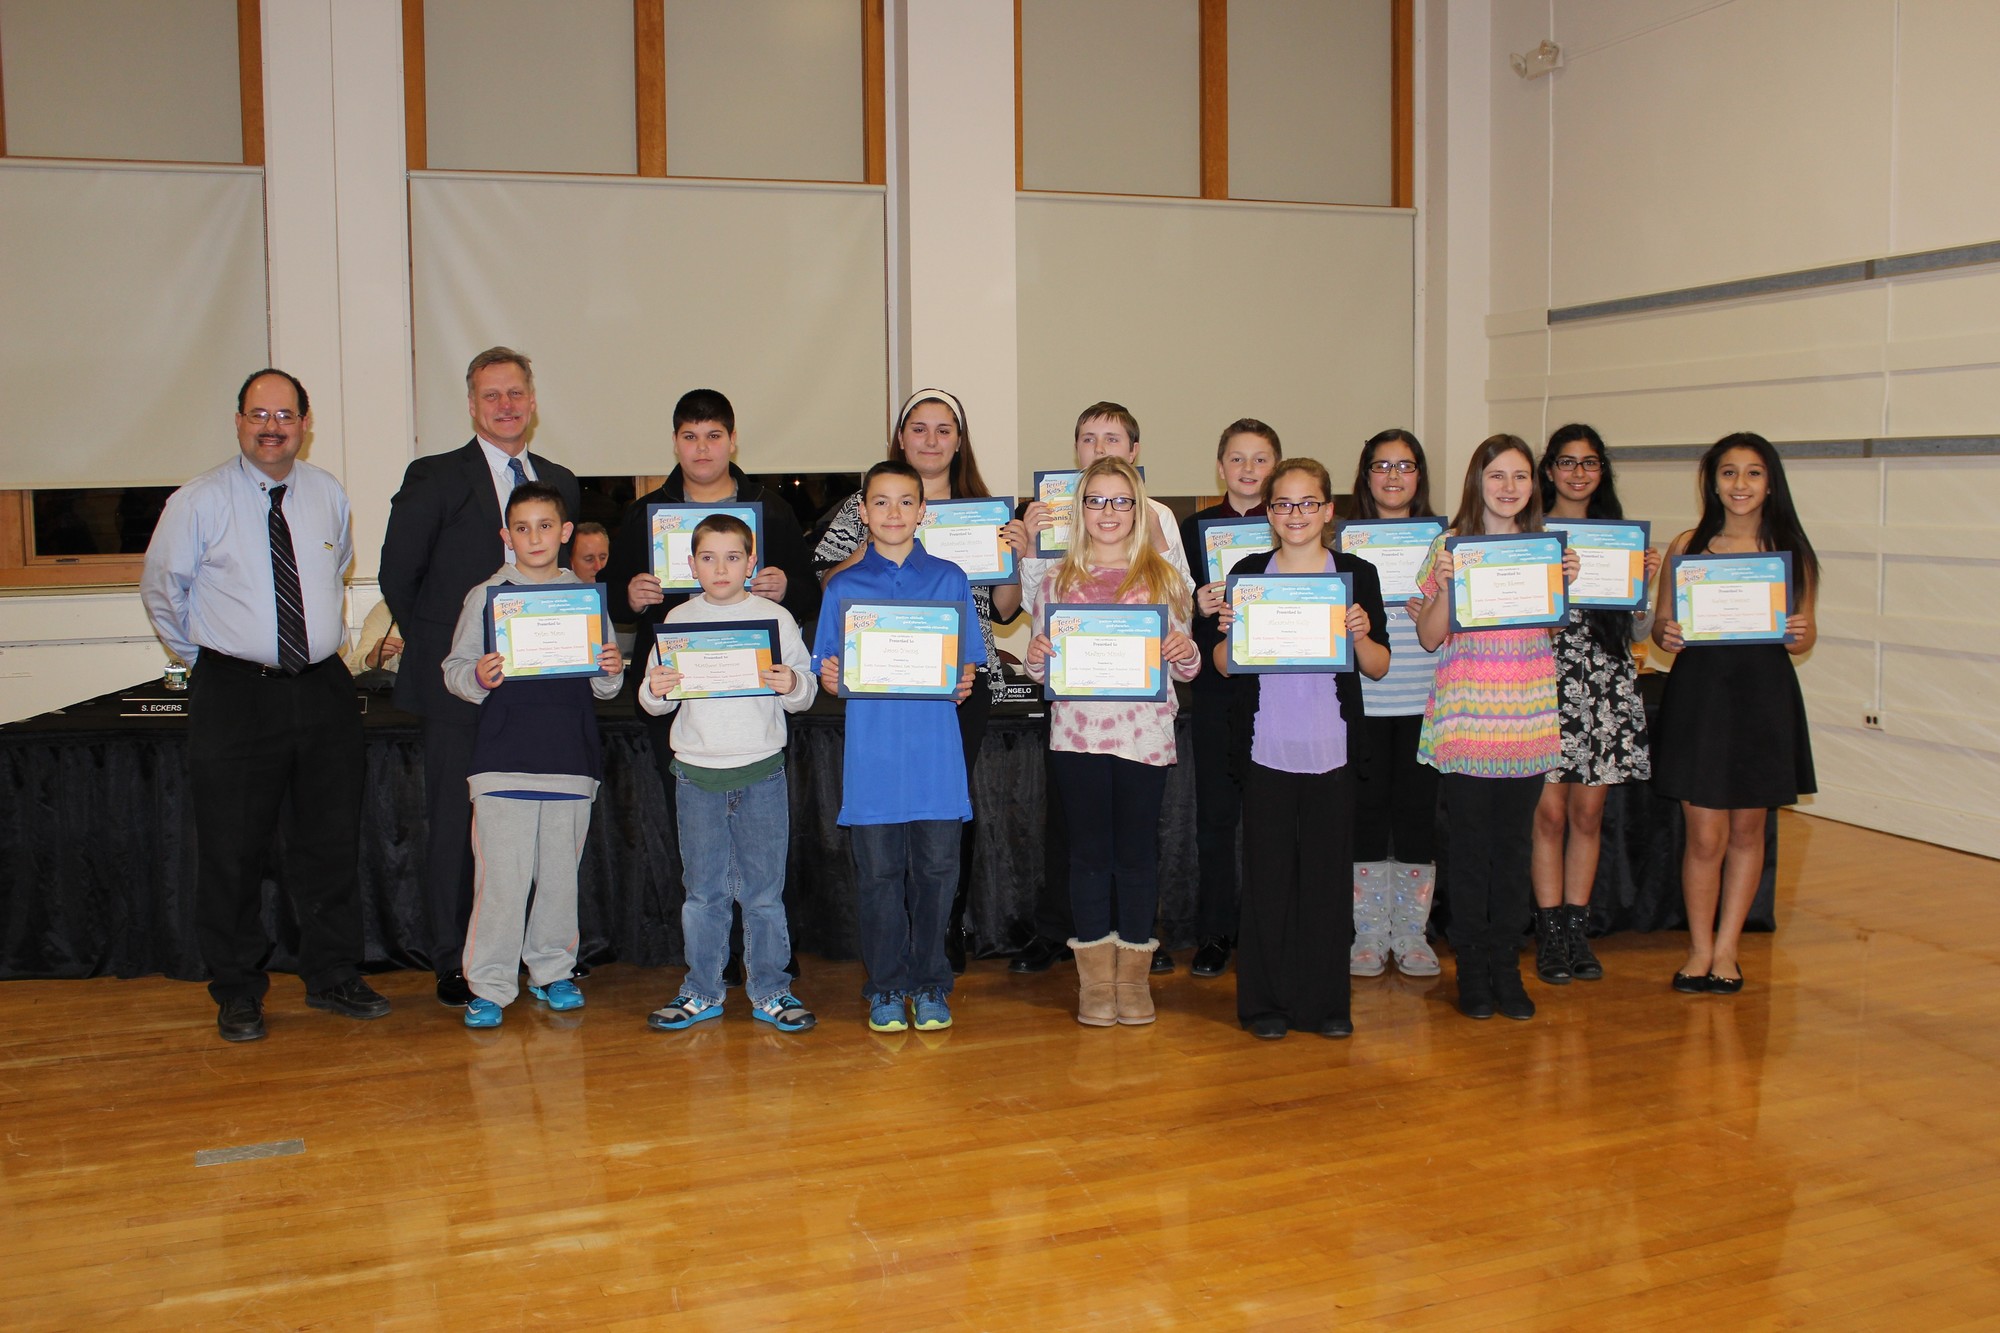 Woodland Middle School Principal James Lethbridge and Kamper also recognized Woodland students as Terrific Kids on Feb. 26.